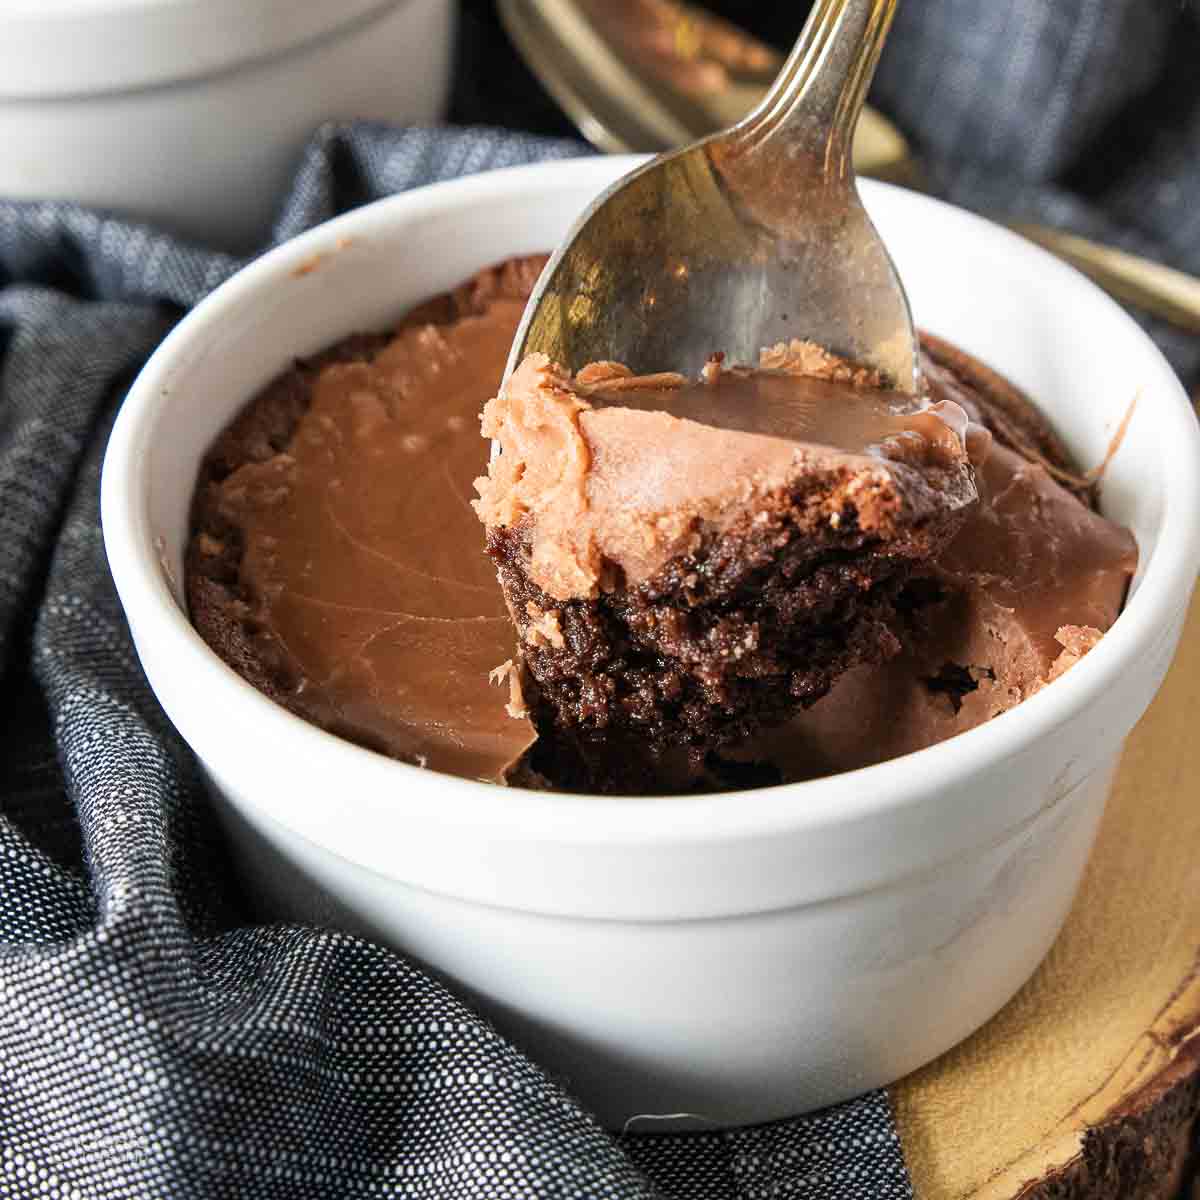 spoon scooping chocolate cake topped with icing from soufflé dish